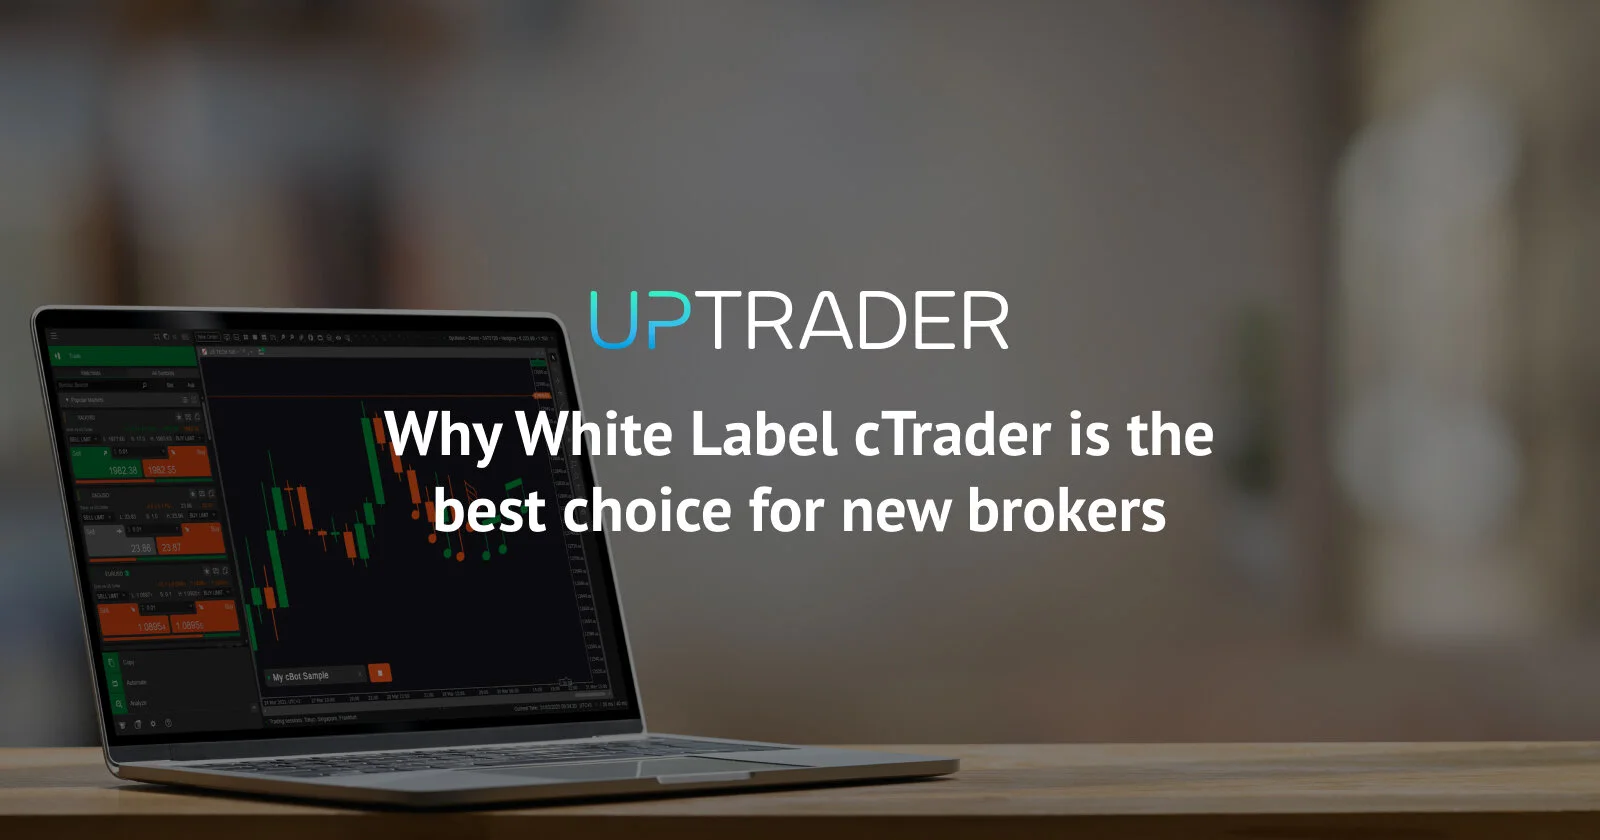 Why White Label cTrader is the best choice for new brokers